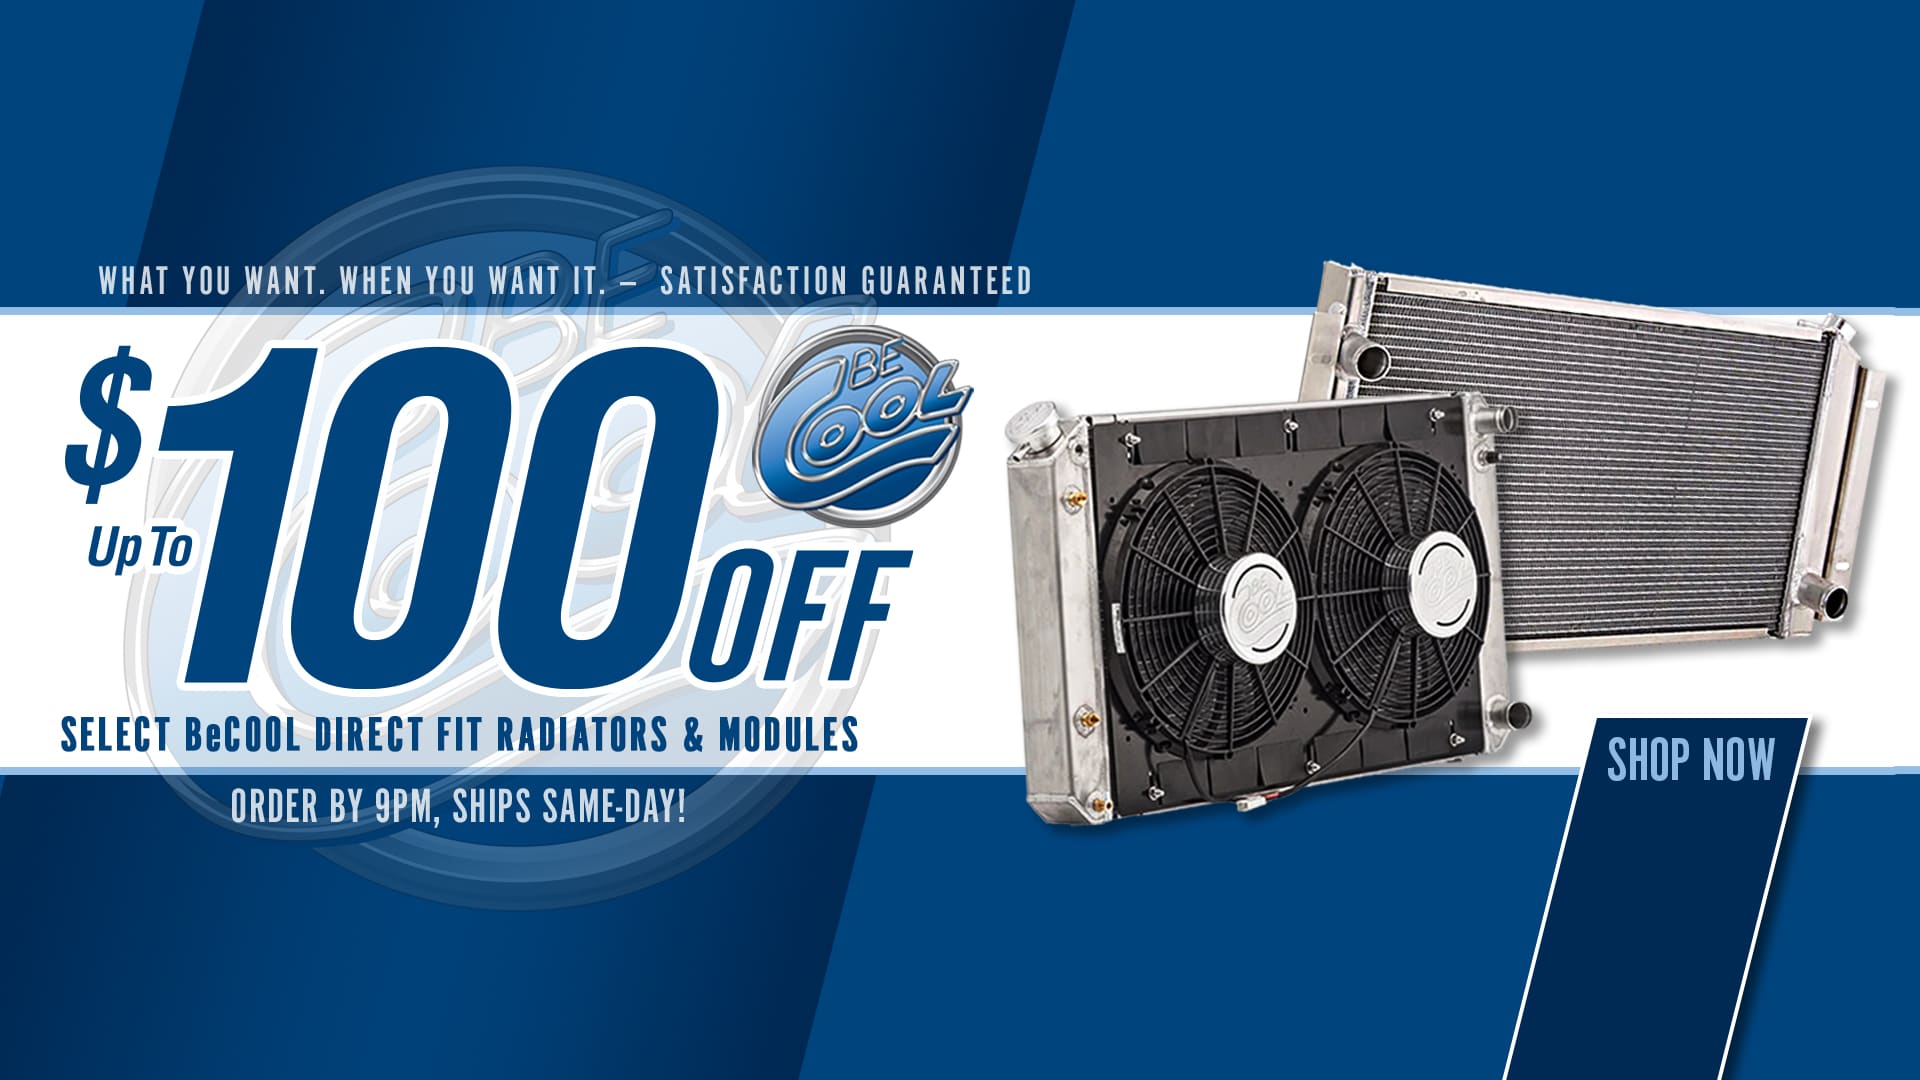 Save $50 on Be Cool Direct Fit Radiators and $100 on Direct Fit Modules